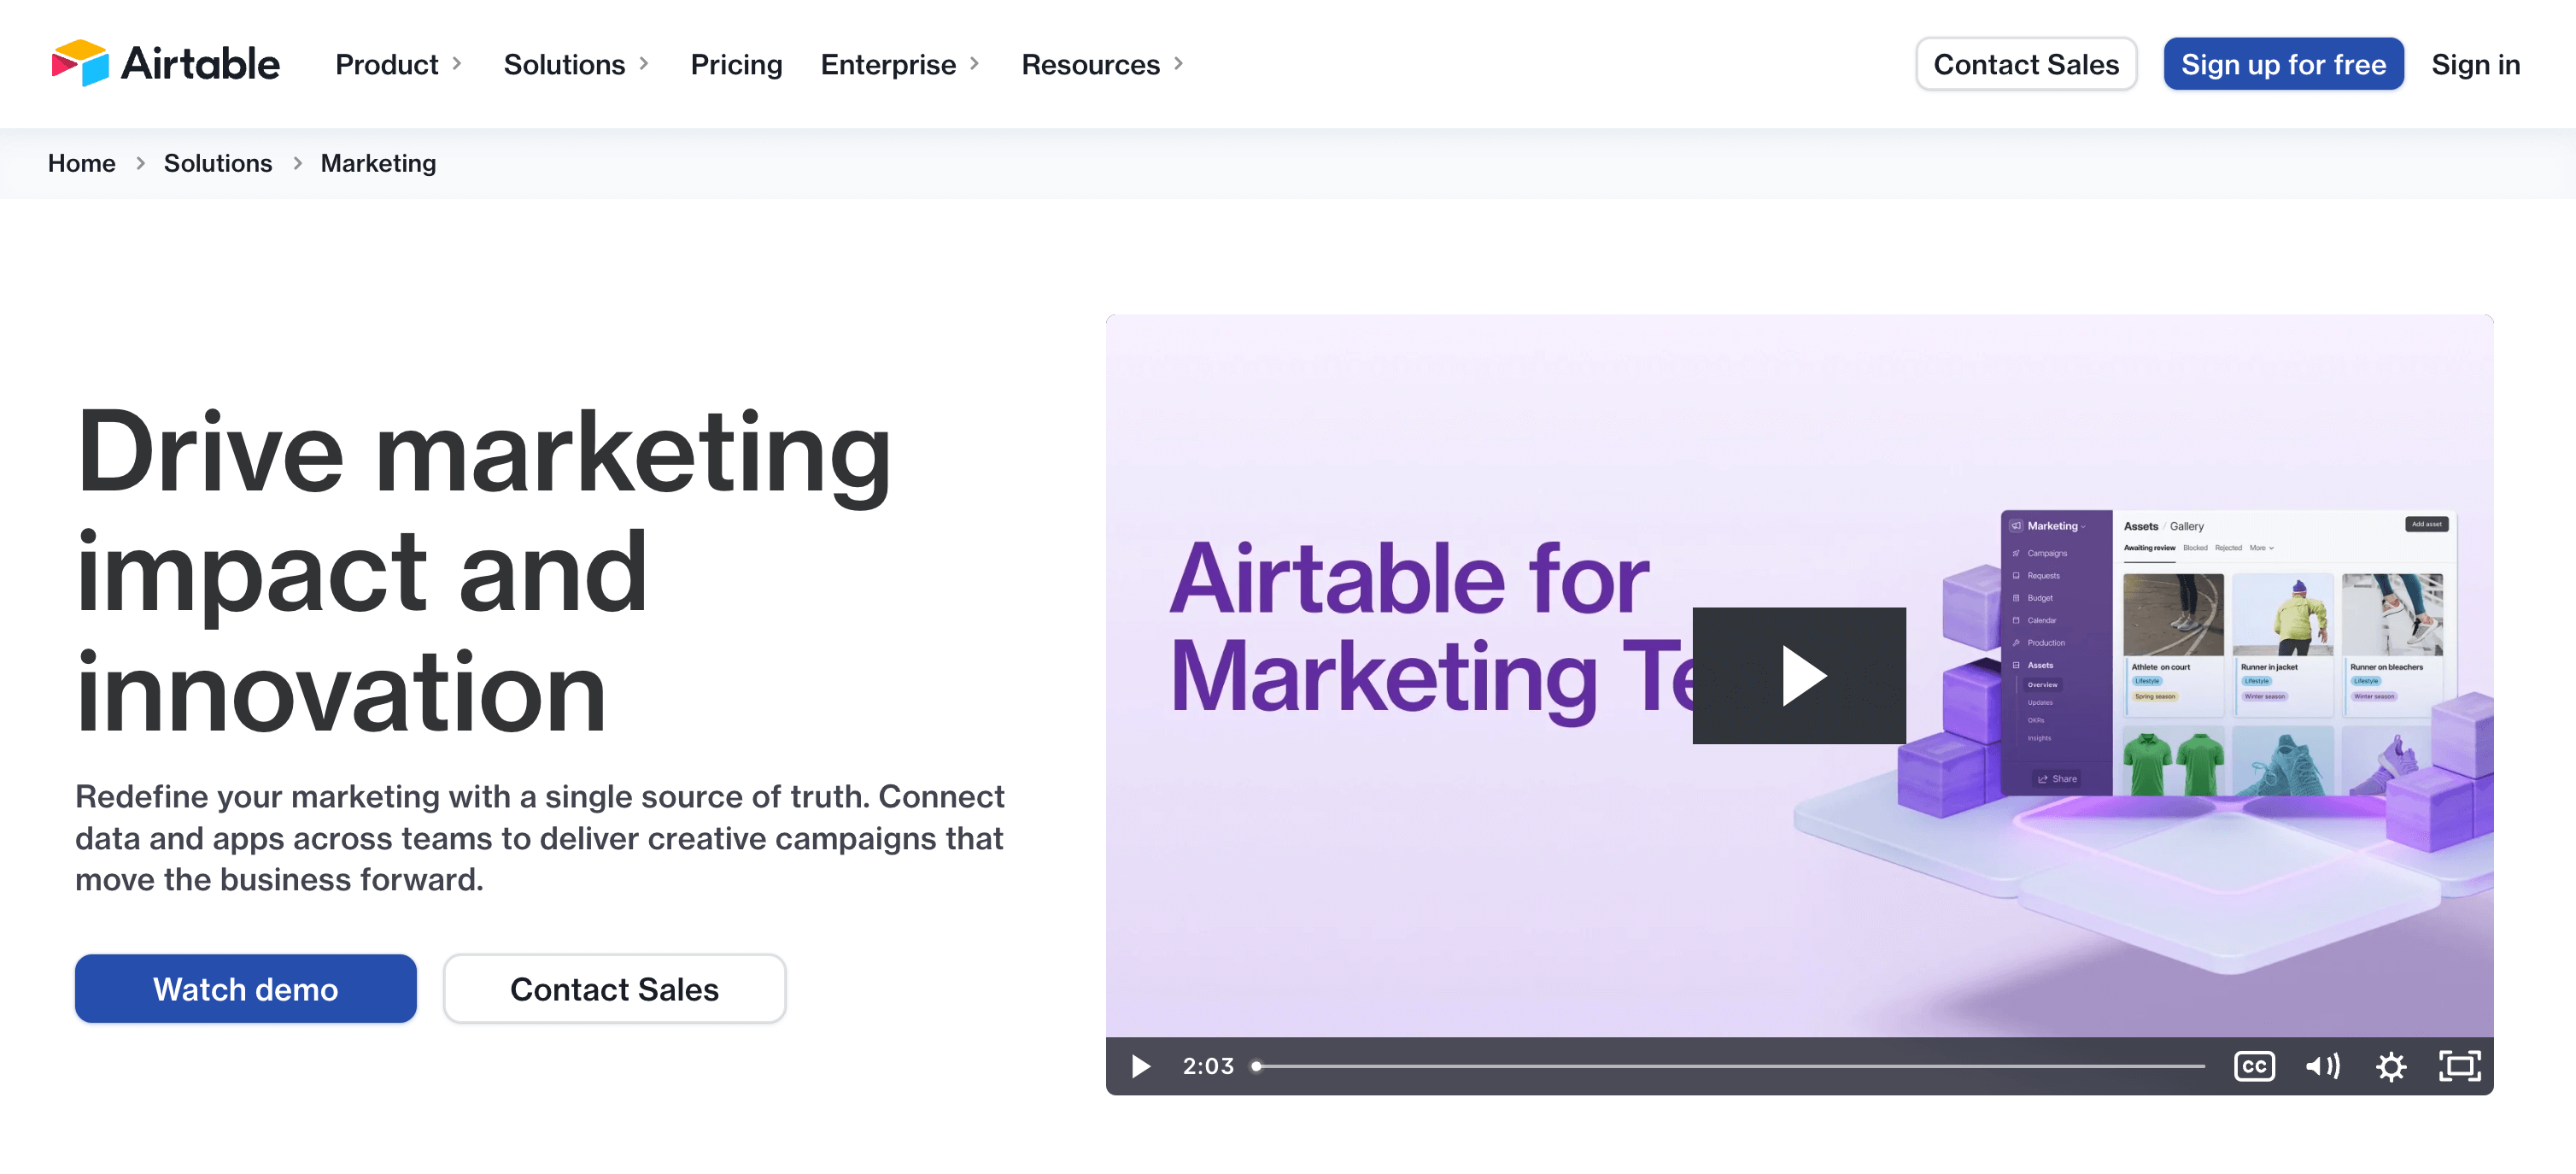 Airtable website screenshot showing a video titled Airtable for Marketing Teams with the text "Drive marketing impact and innovation".